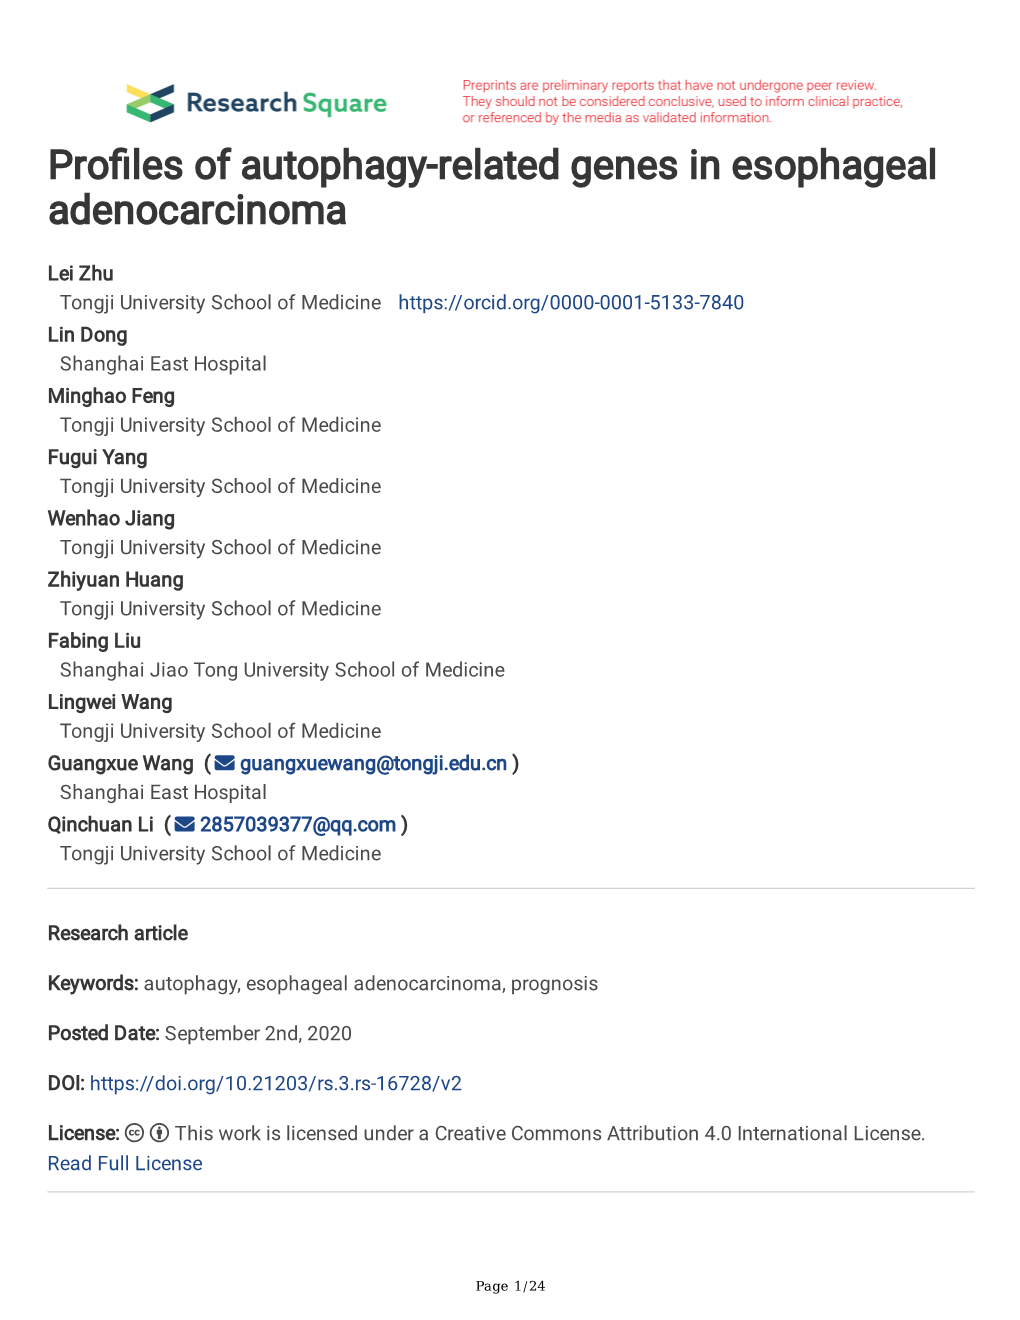 Pro Les of Autophagy-Related Genes in Esophageal Adenocarcinoma